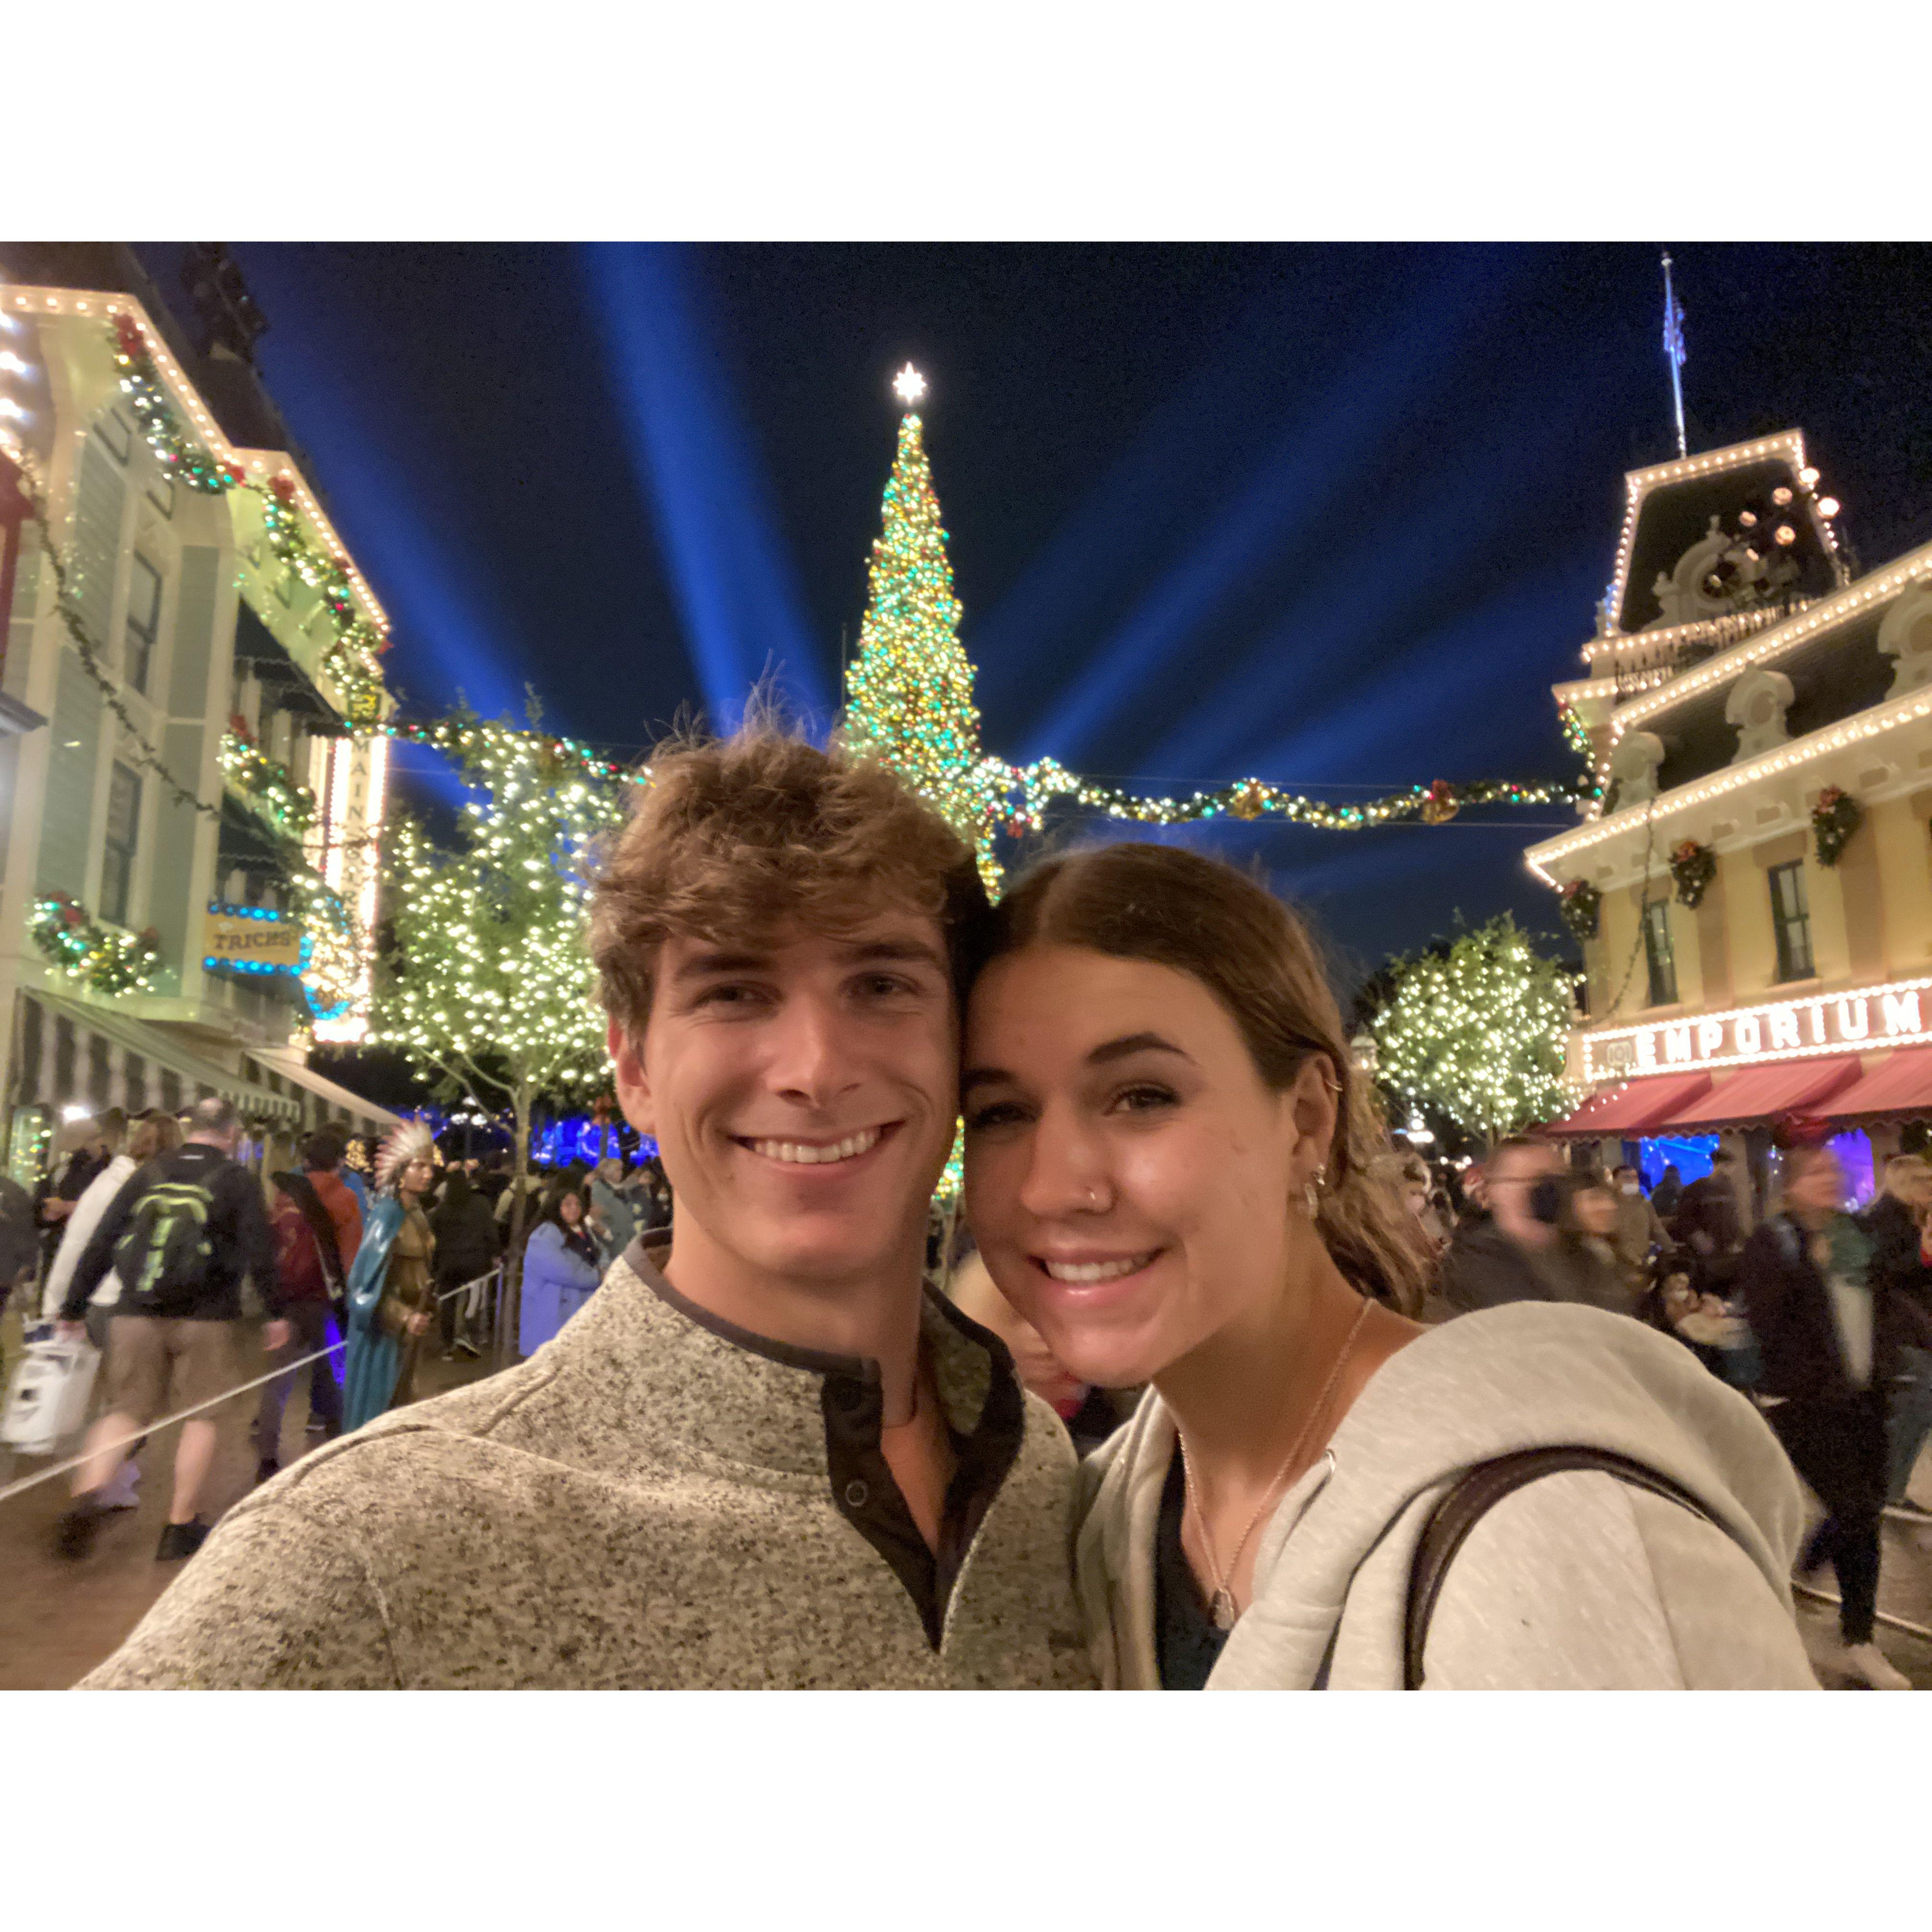 First Disneyland date of many